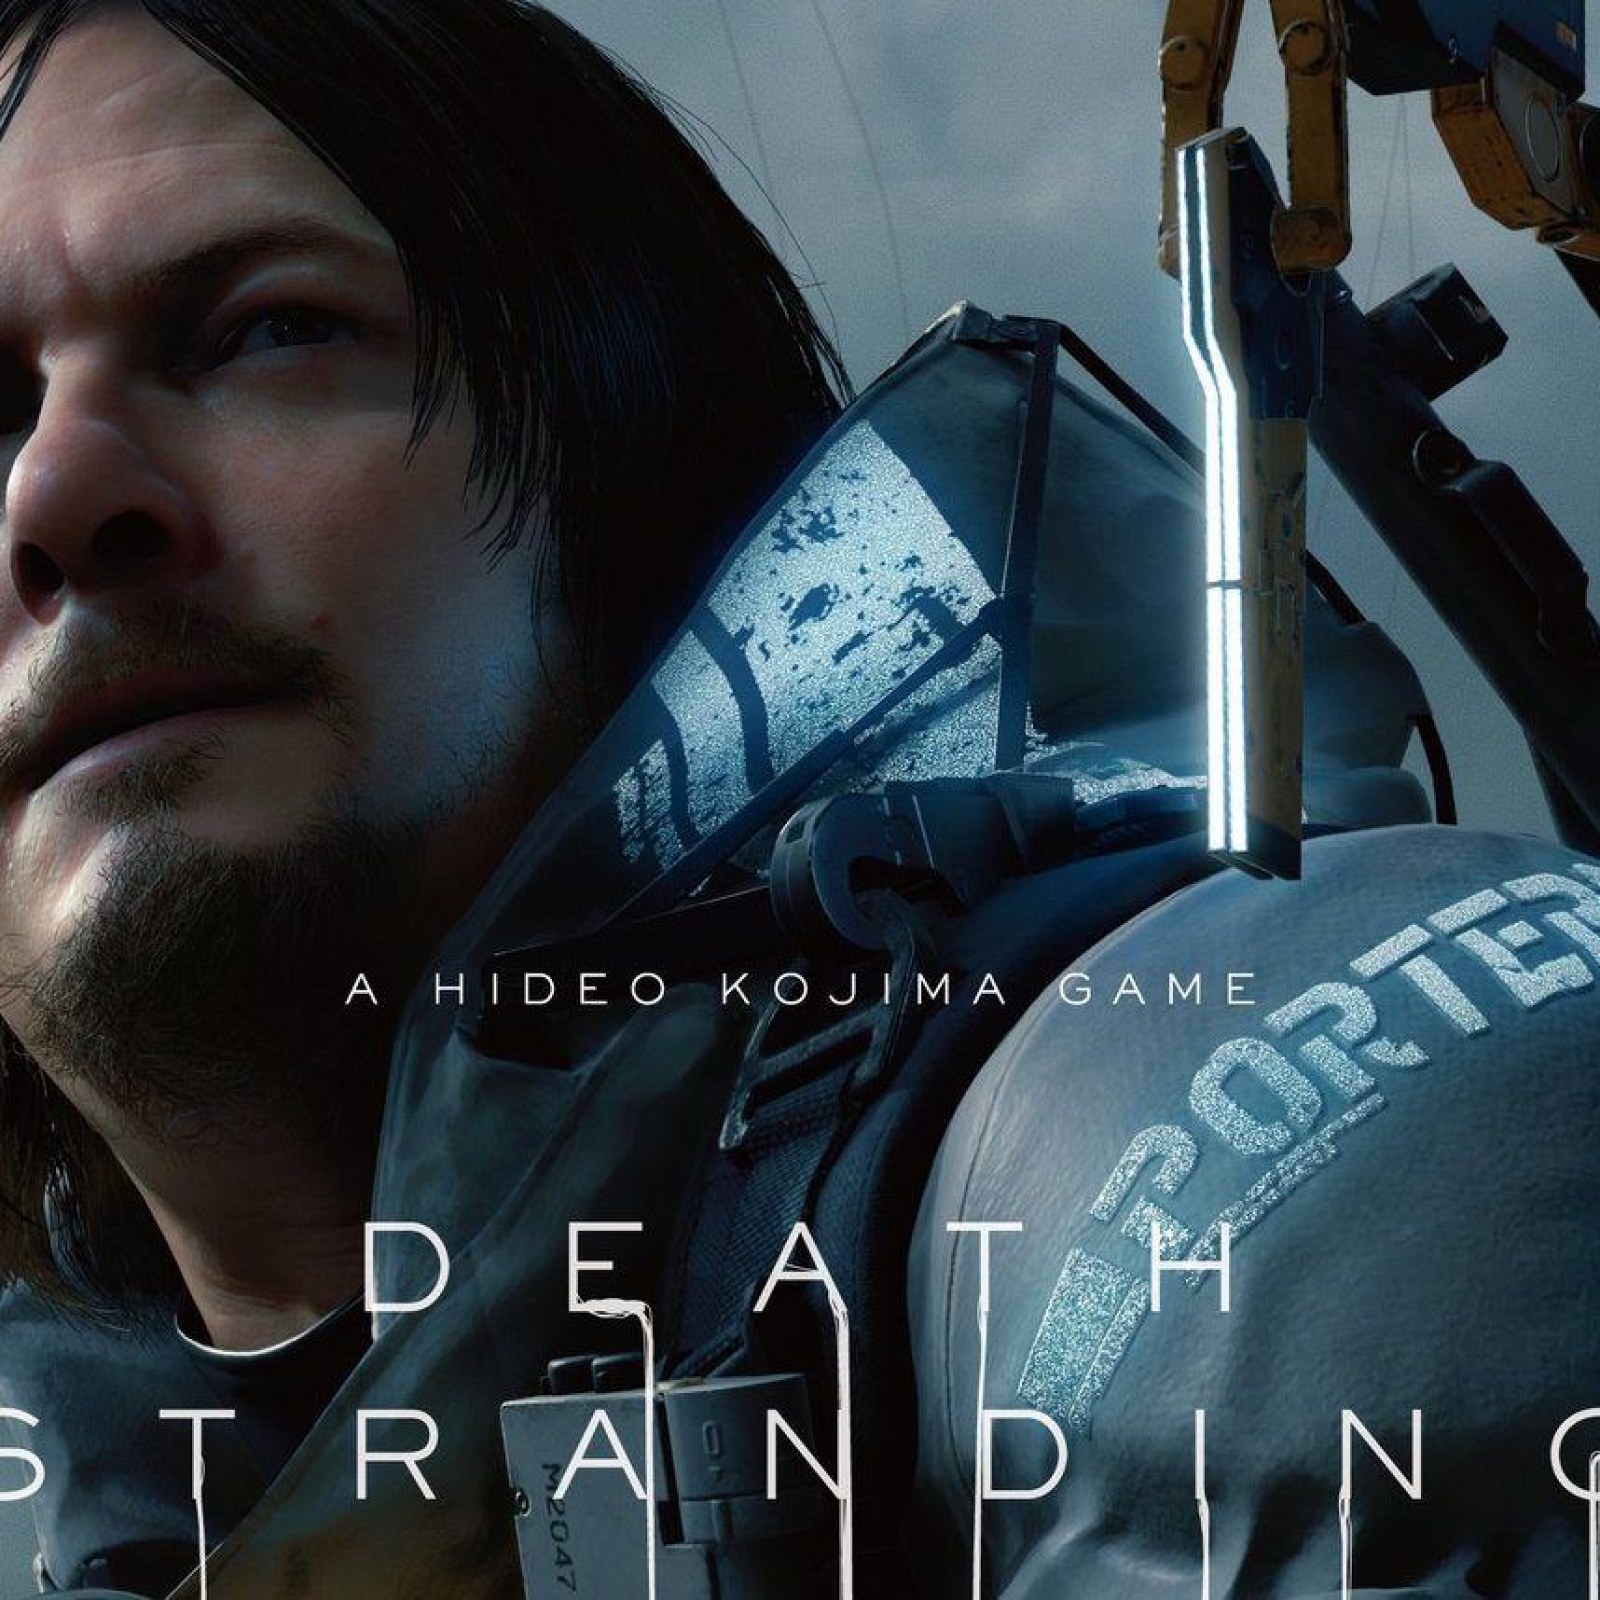 Death Stranding' Cast Revealed: A 70s TV Icon, James Bond Veterans and More